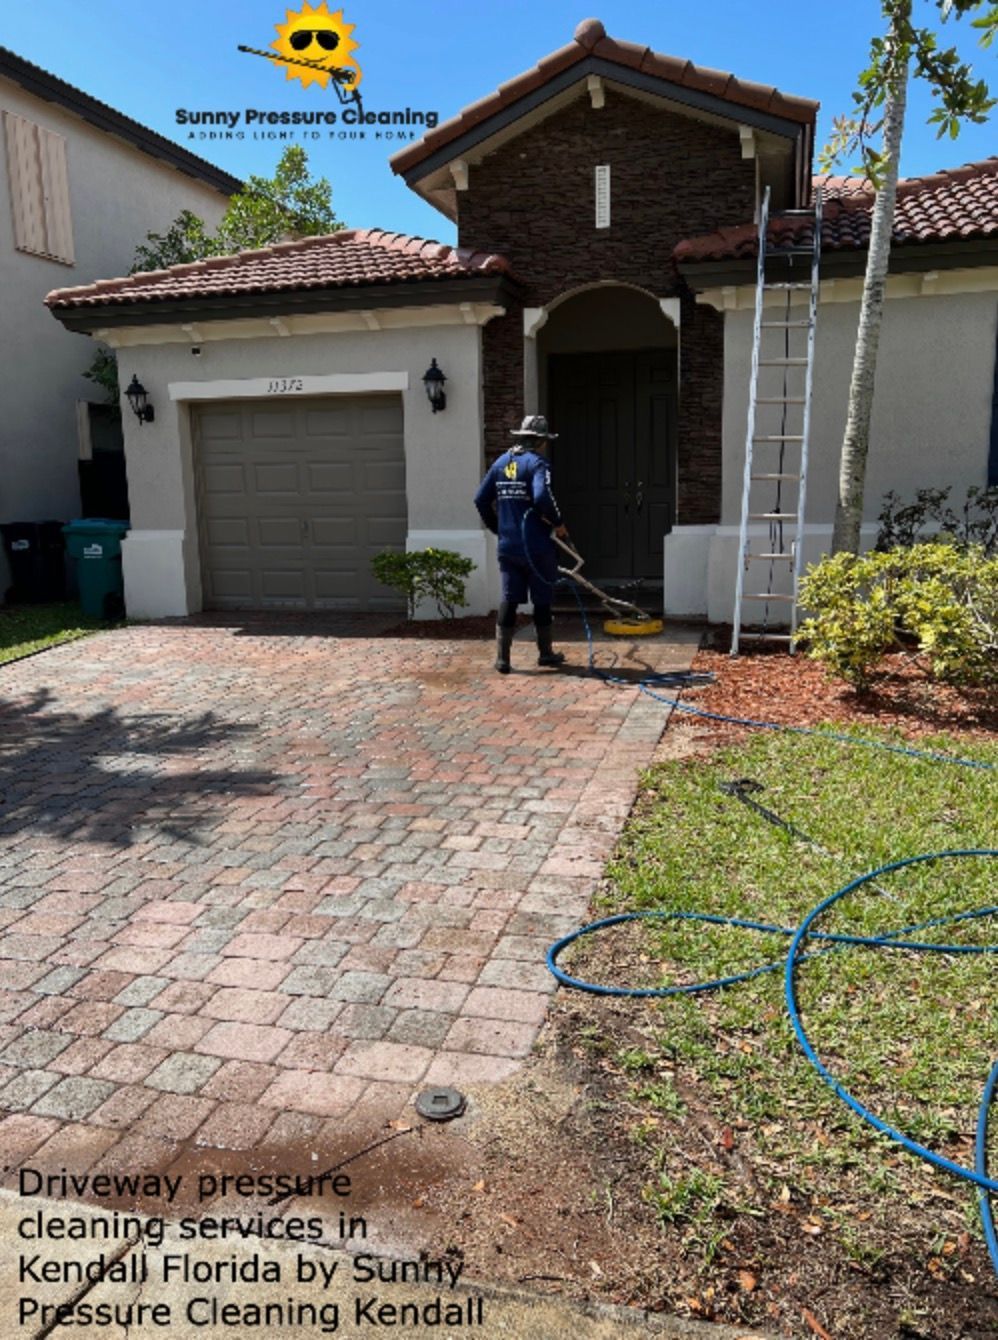 driveway pressure cleaning services in Kendall Lakes, Florida by Sunny Pressure Cleaning Kendall